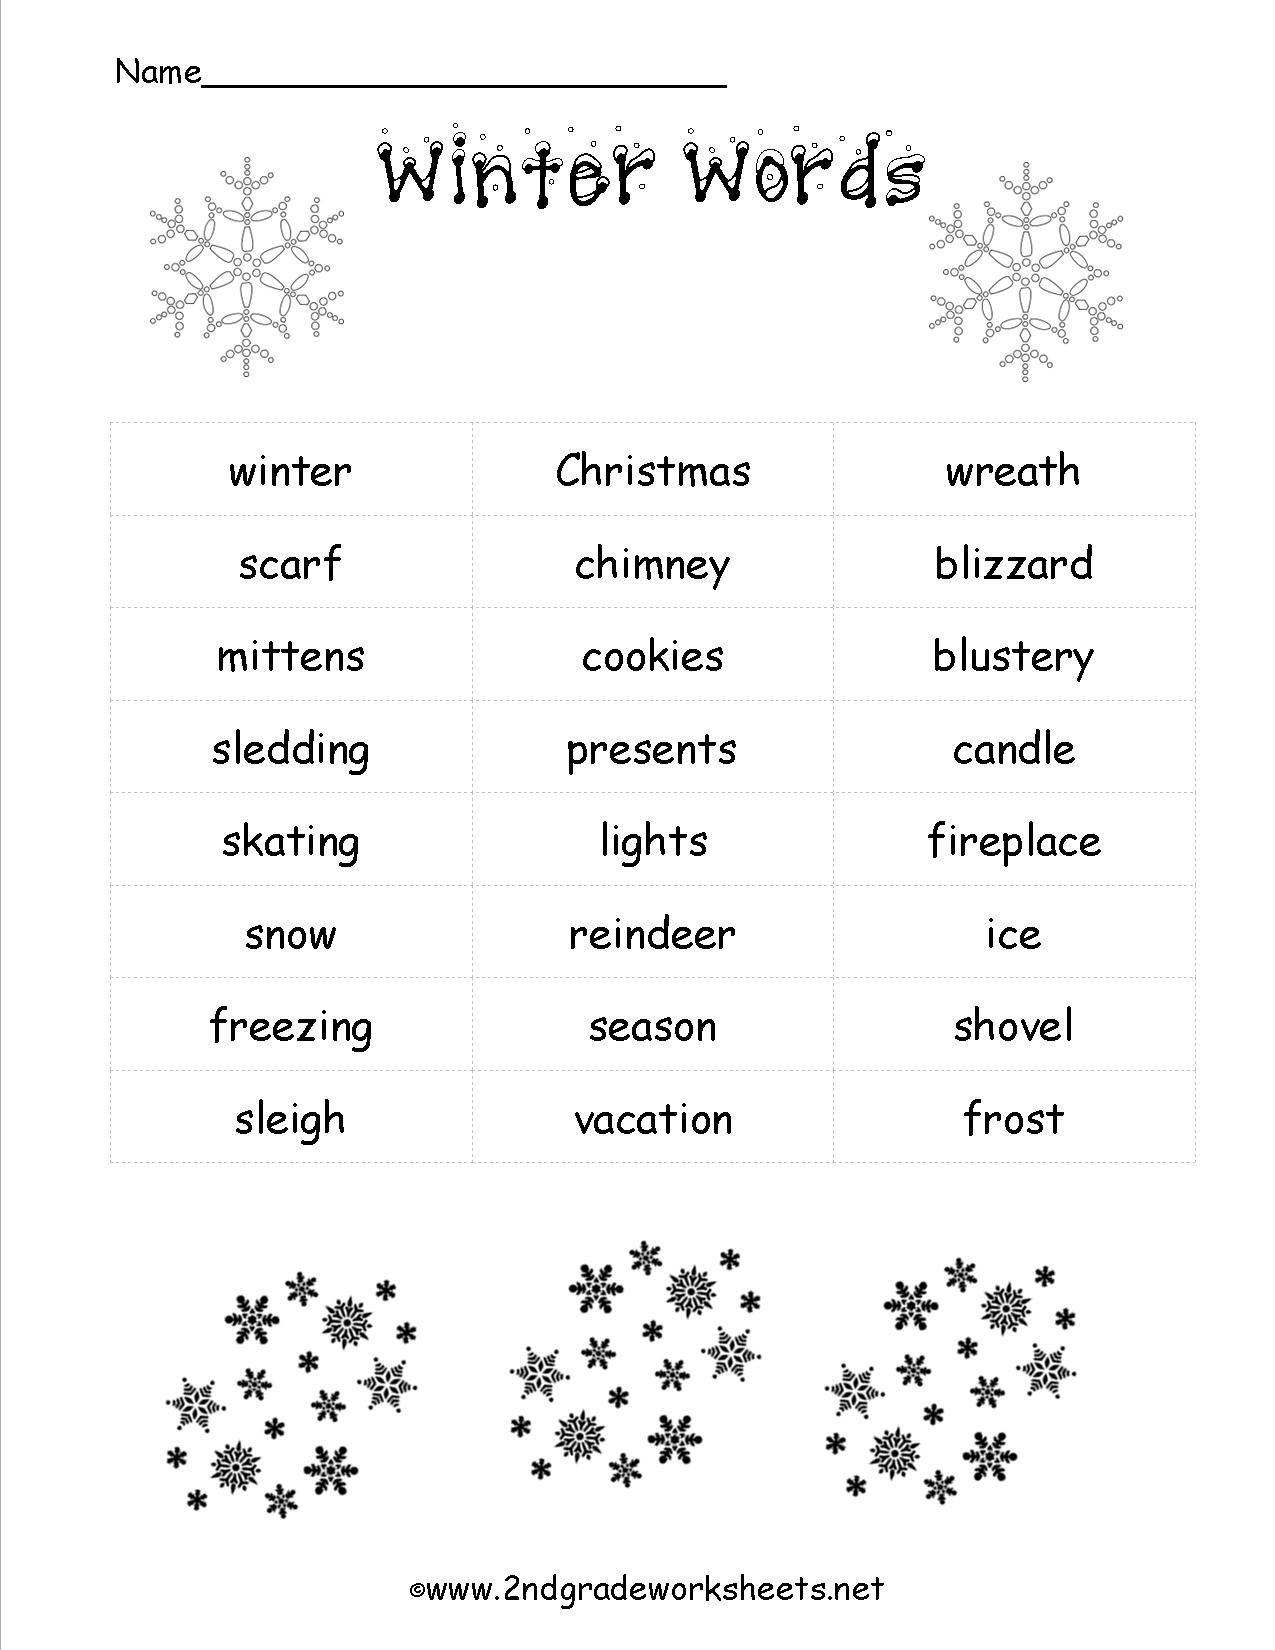 Christmas Worksheets And Printouts - Free Printable Christmas | Free Printable Christmas Worksheets For Third Grade